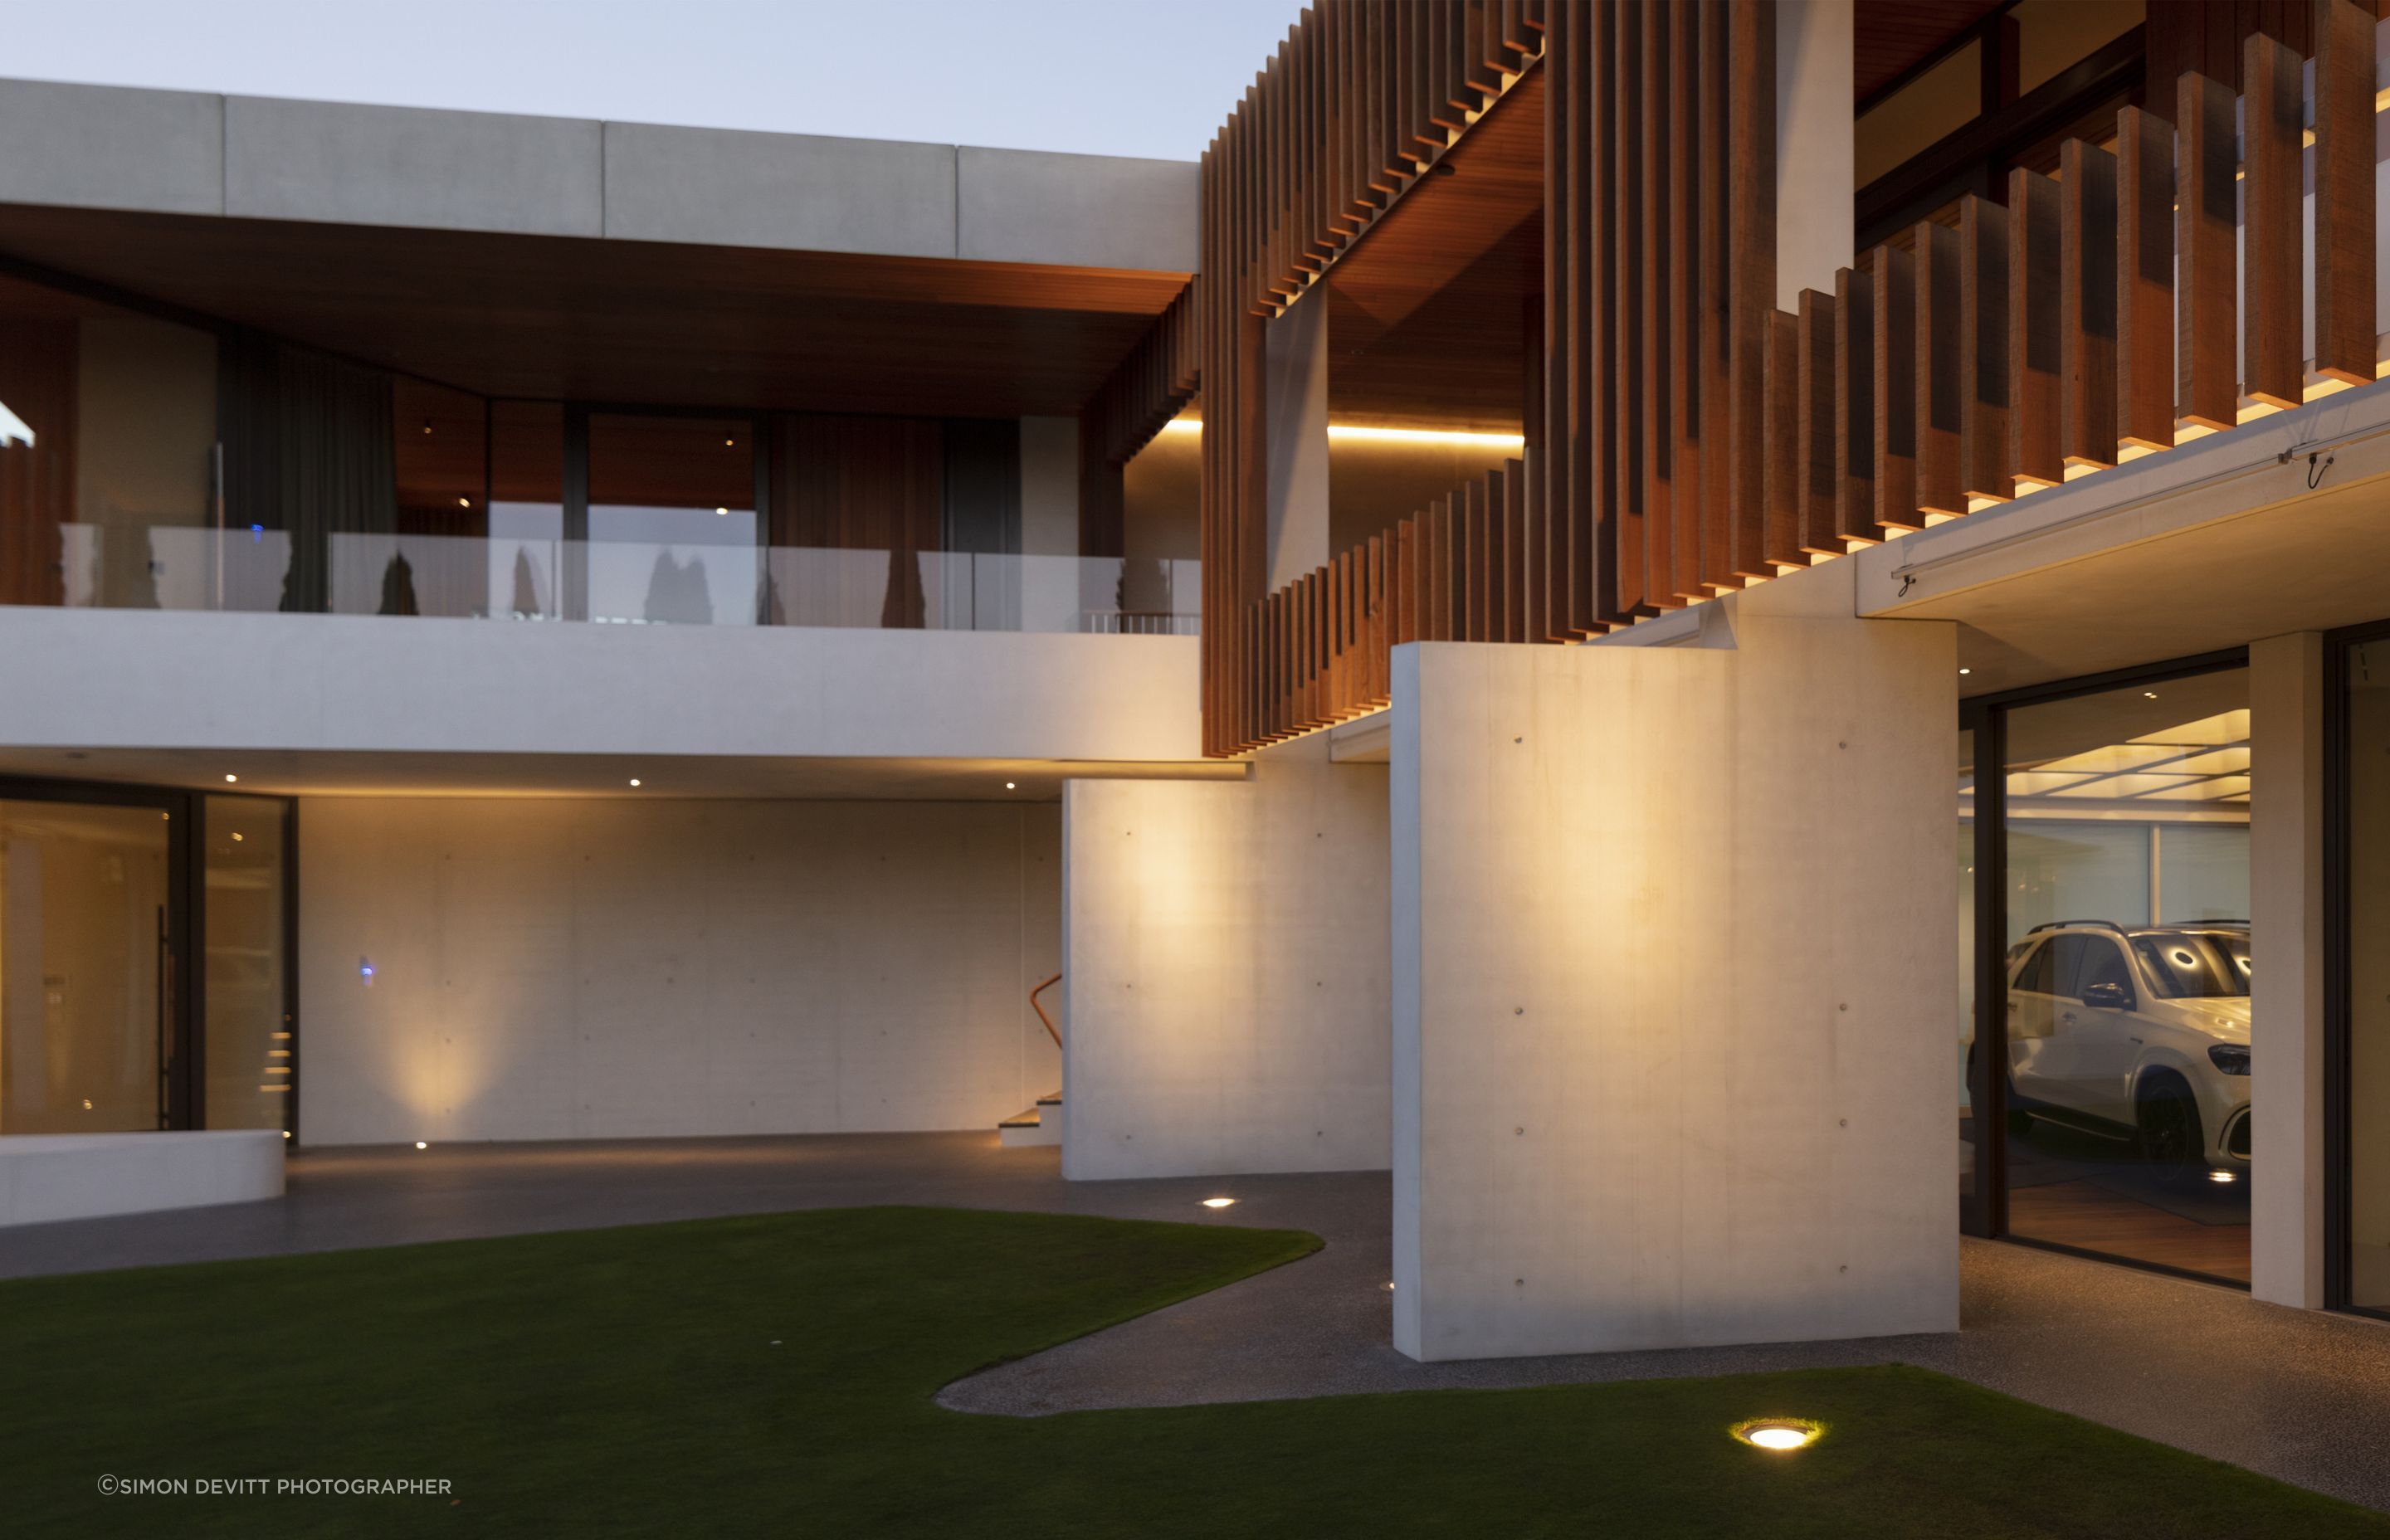 The courtyard displays the elements of the building's design – concrete, cedar and curvaceous forms.